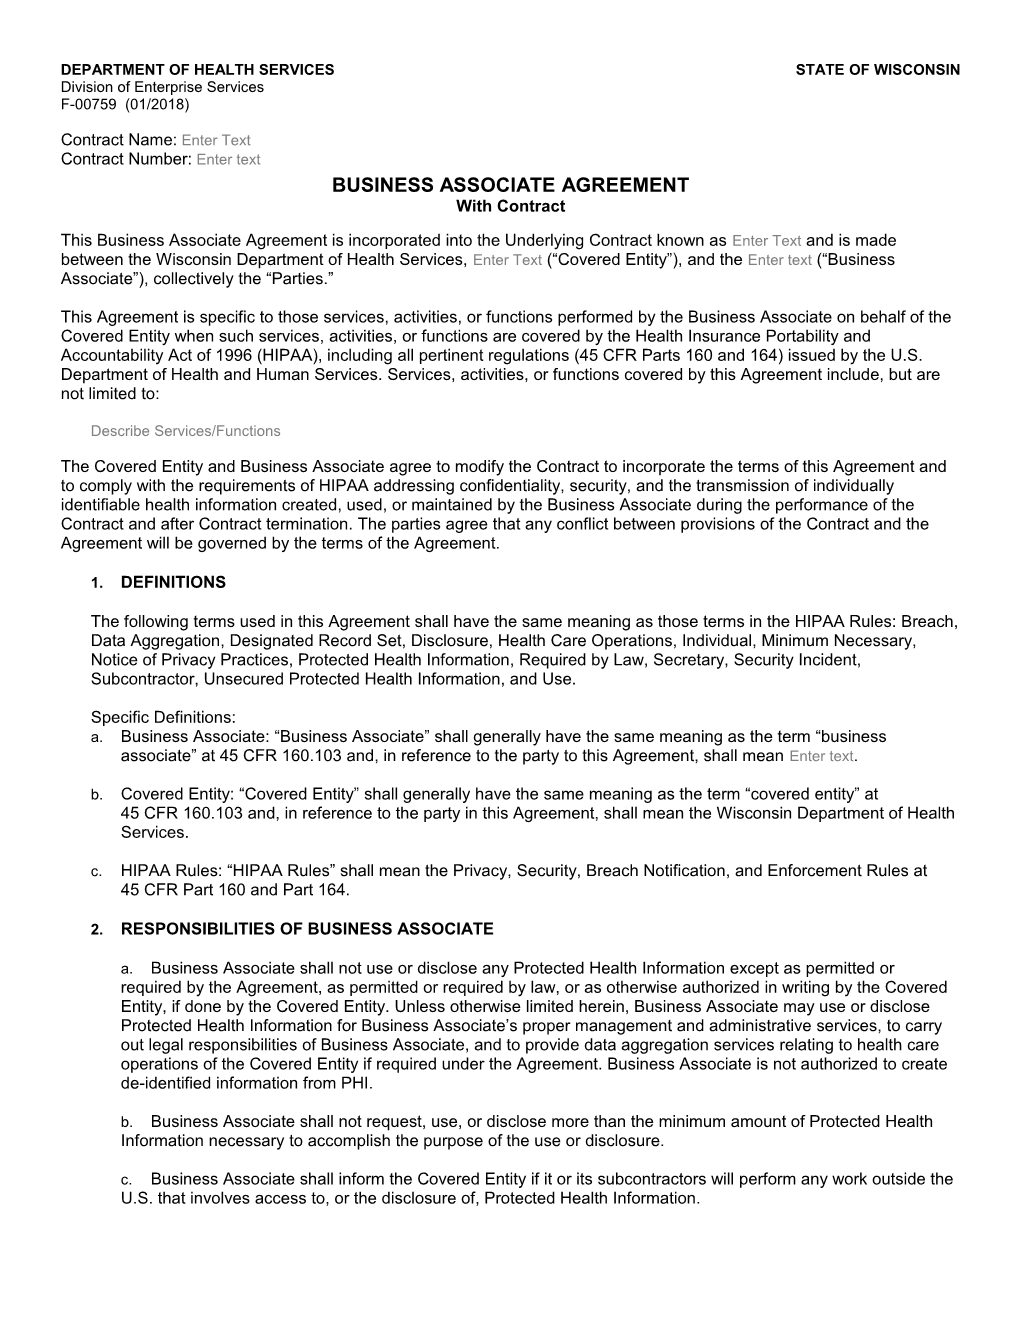 Business Associate Agreement - with Contract